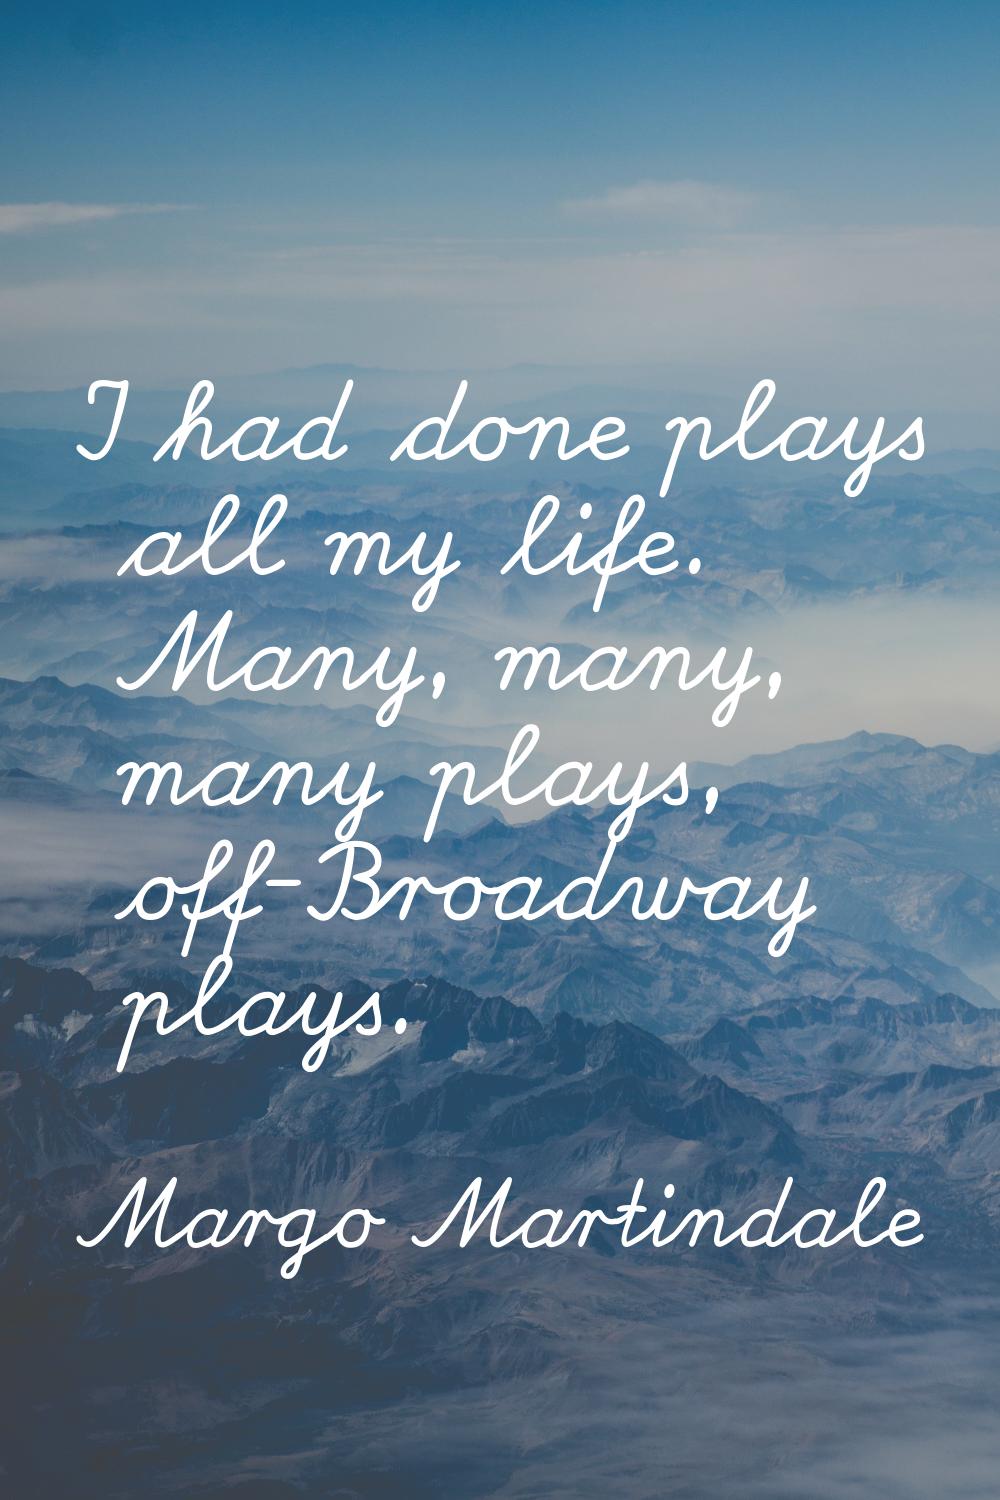 I had done plays all my life. Many, many, many plays, off-Broadway plays.